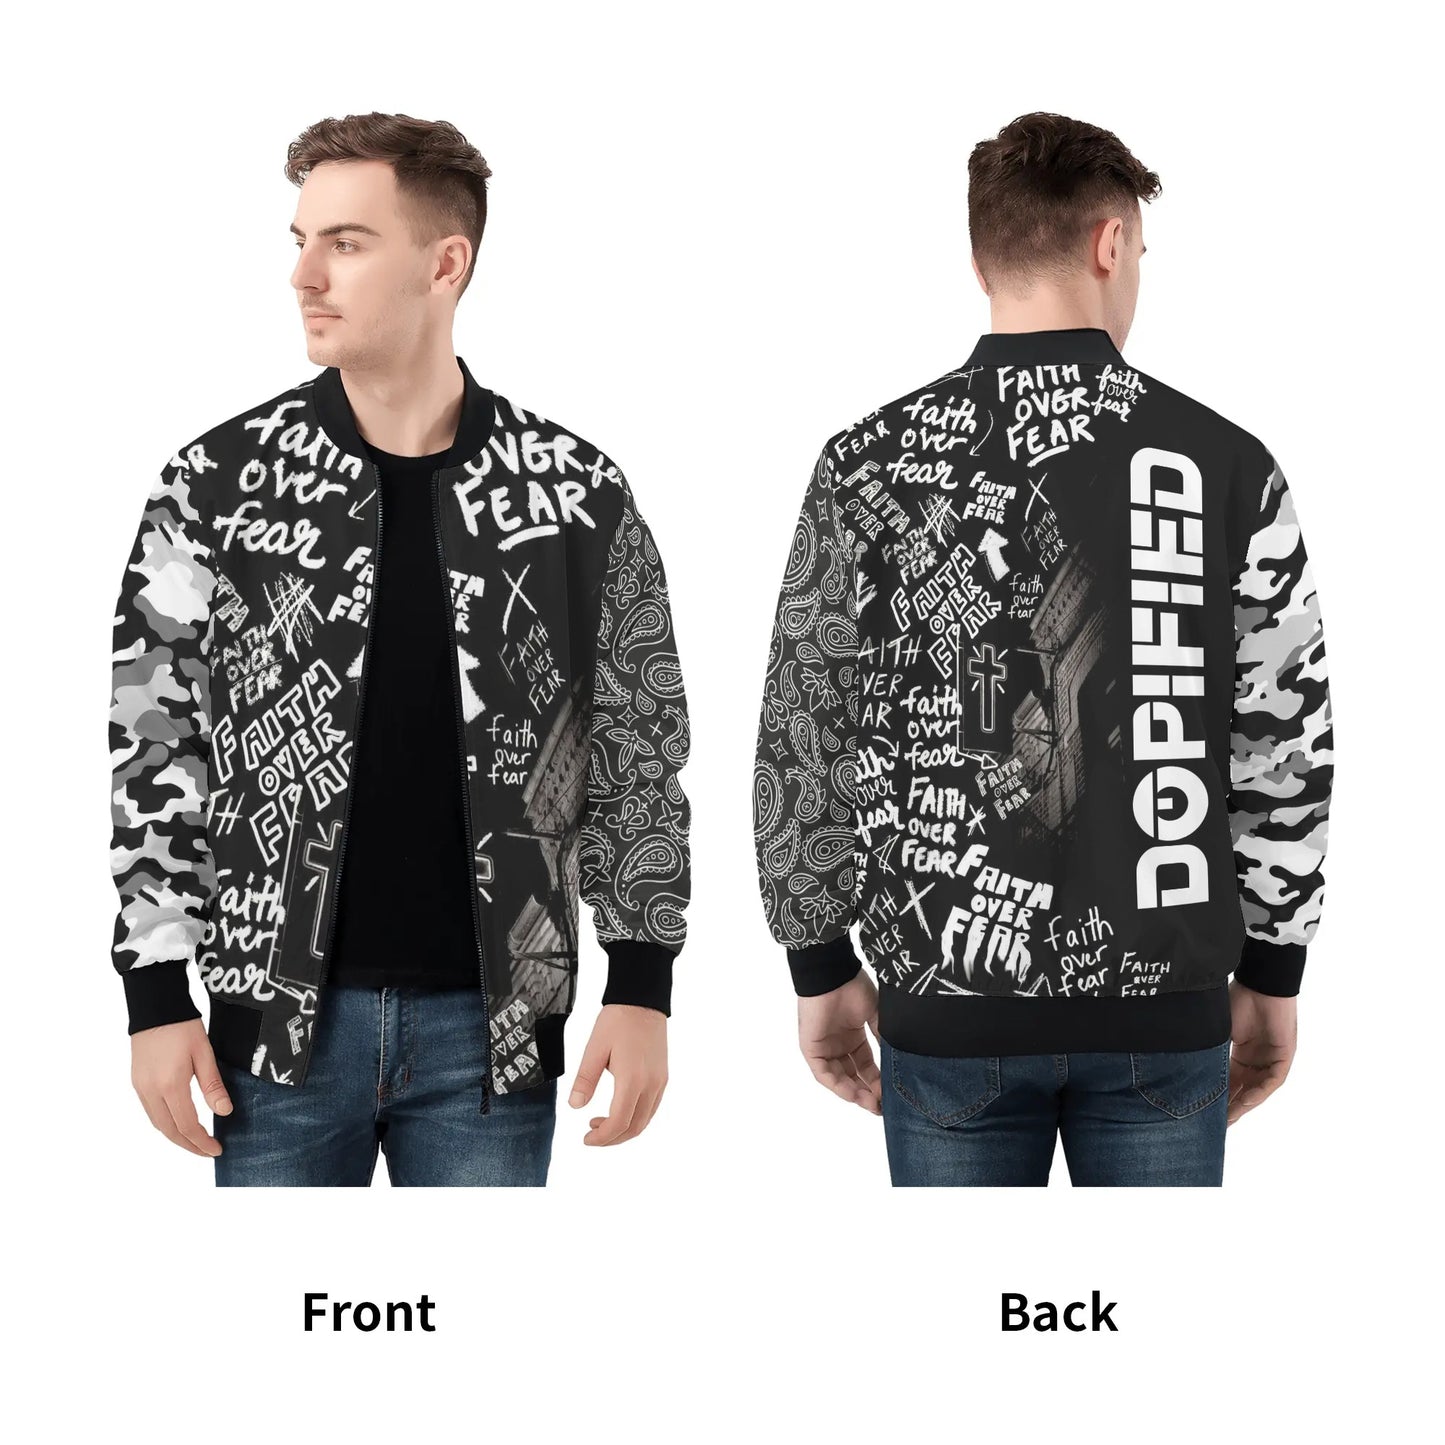 Mens DOPiFiED Faith Over Fear Zip Bomber Jacket